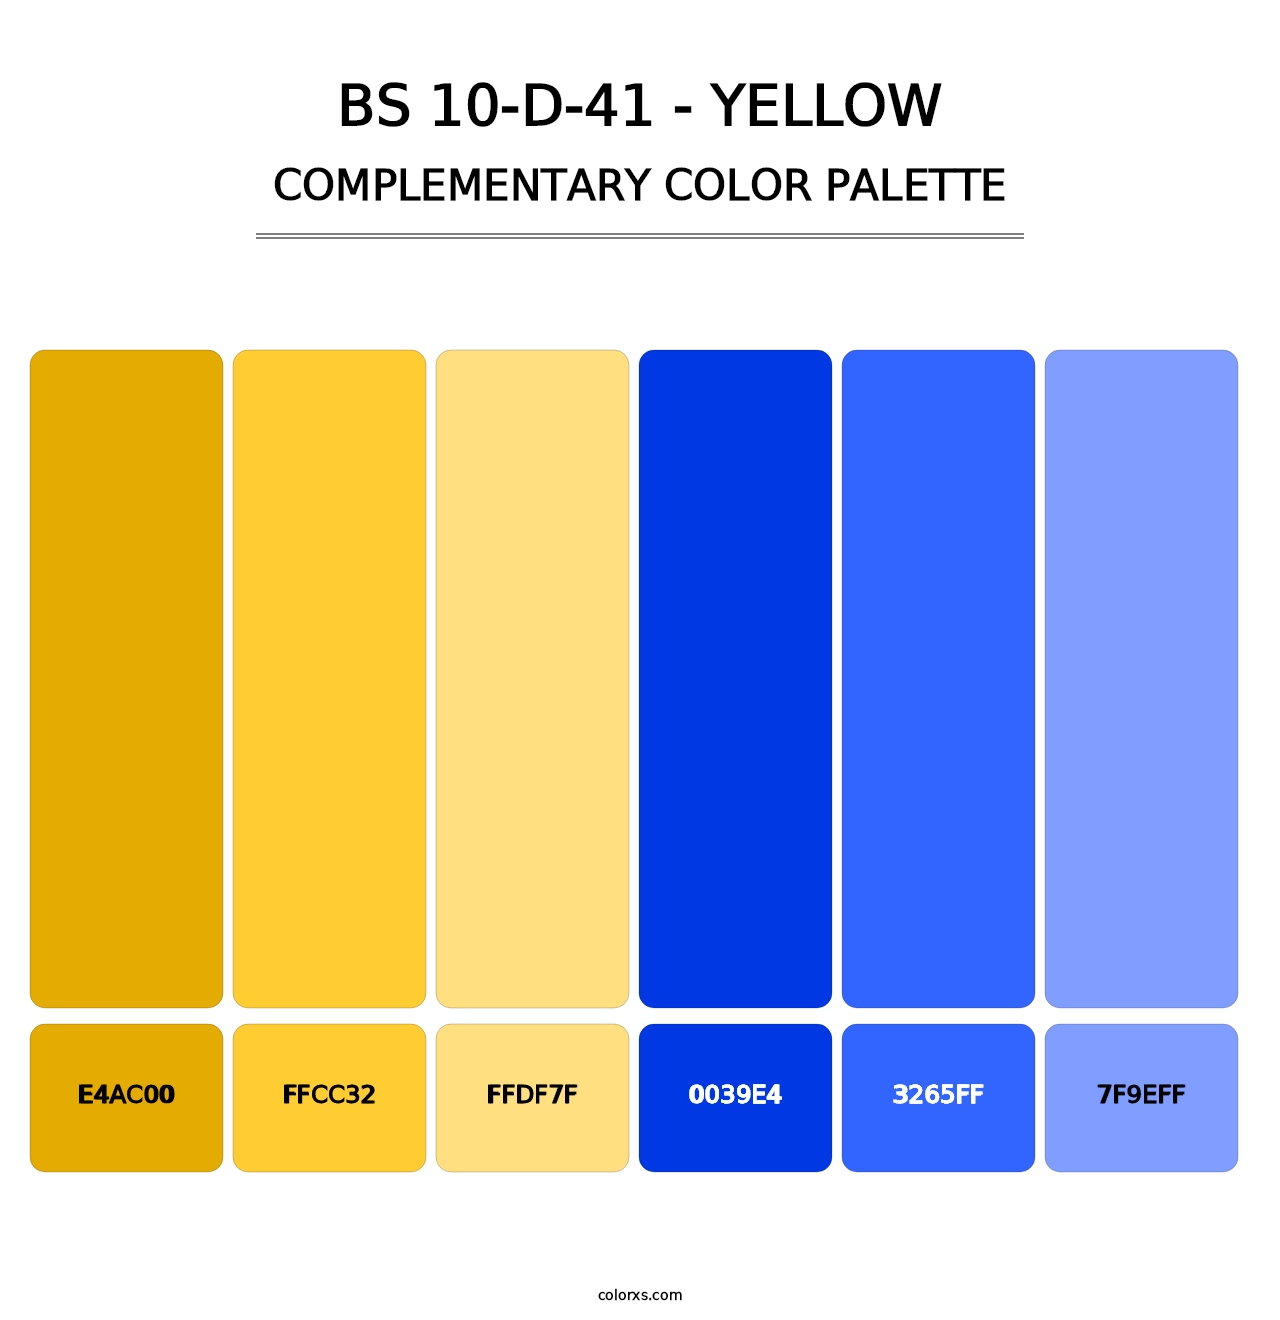 BS 10-D-41 - Yellow - Complementary Color Palette